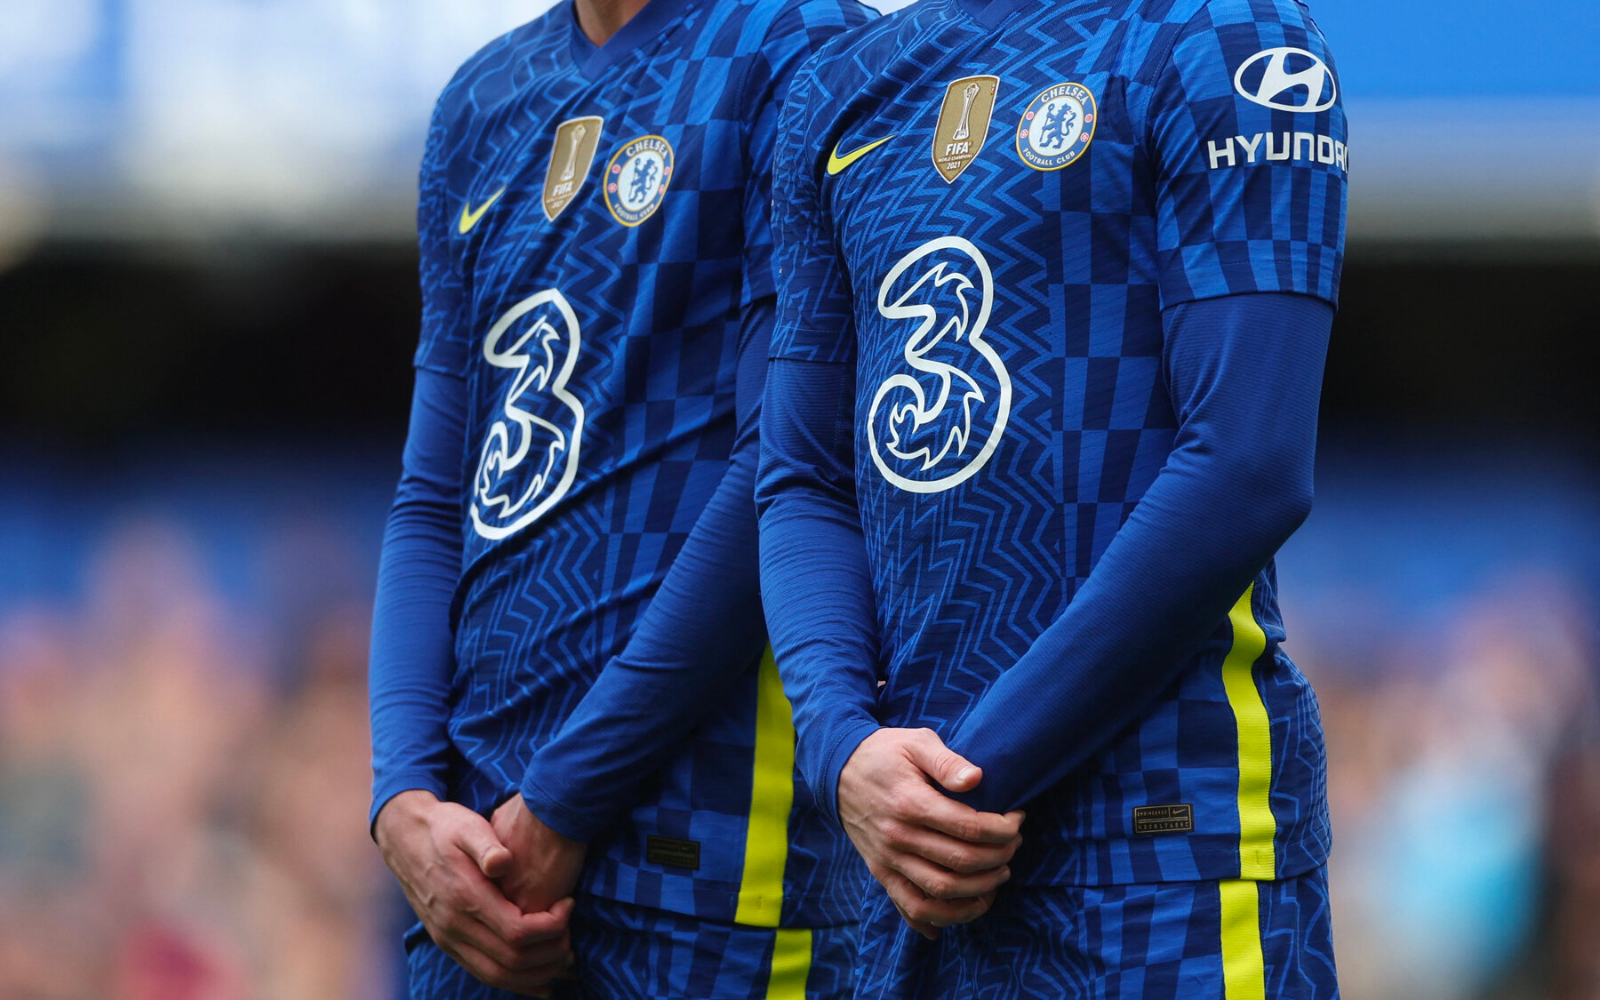 Chelsea won't be able to remove 3 logo from jersey despite sponsor's  requests